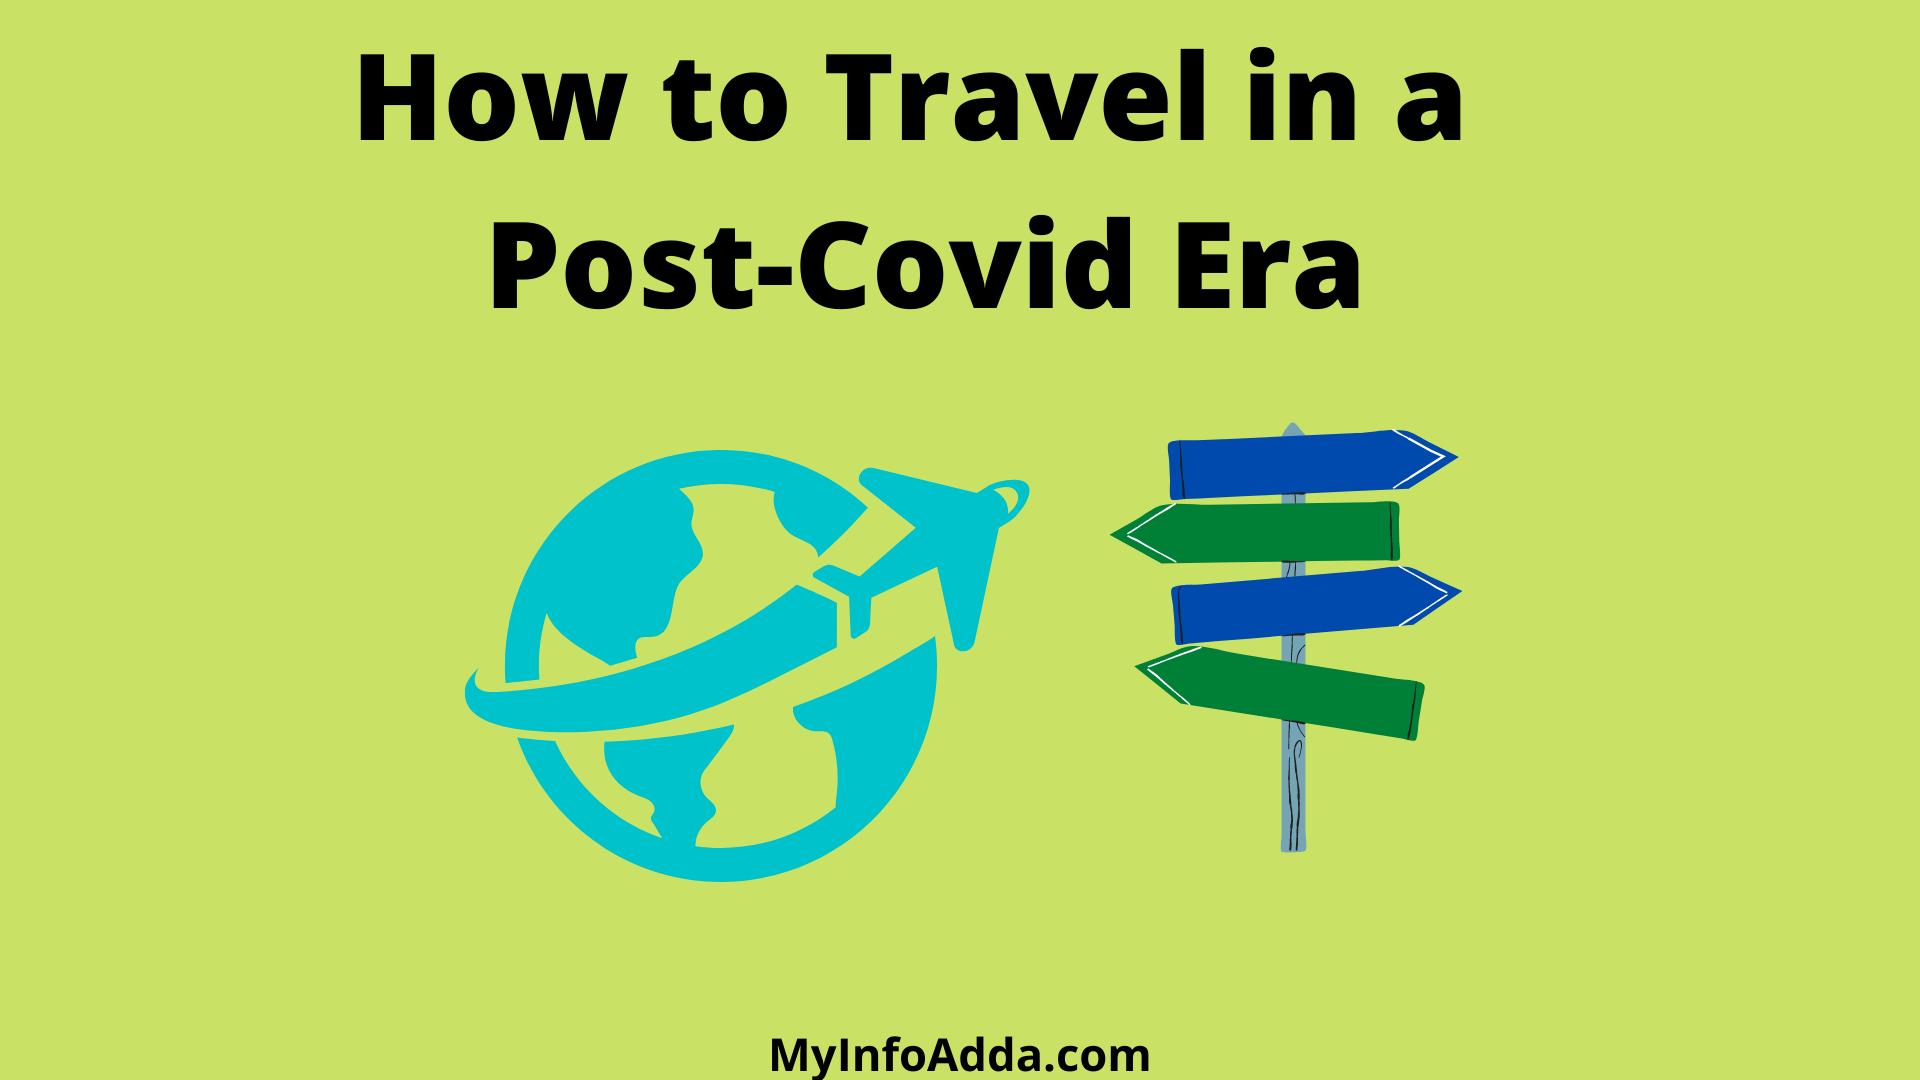 How to Travel in a Post-Covid Era